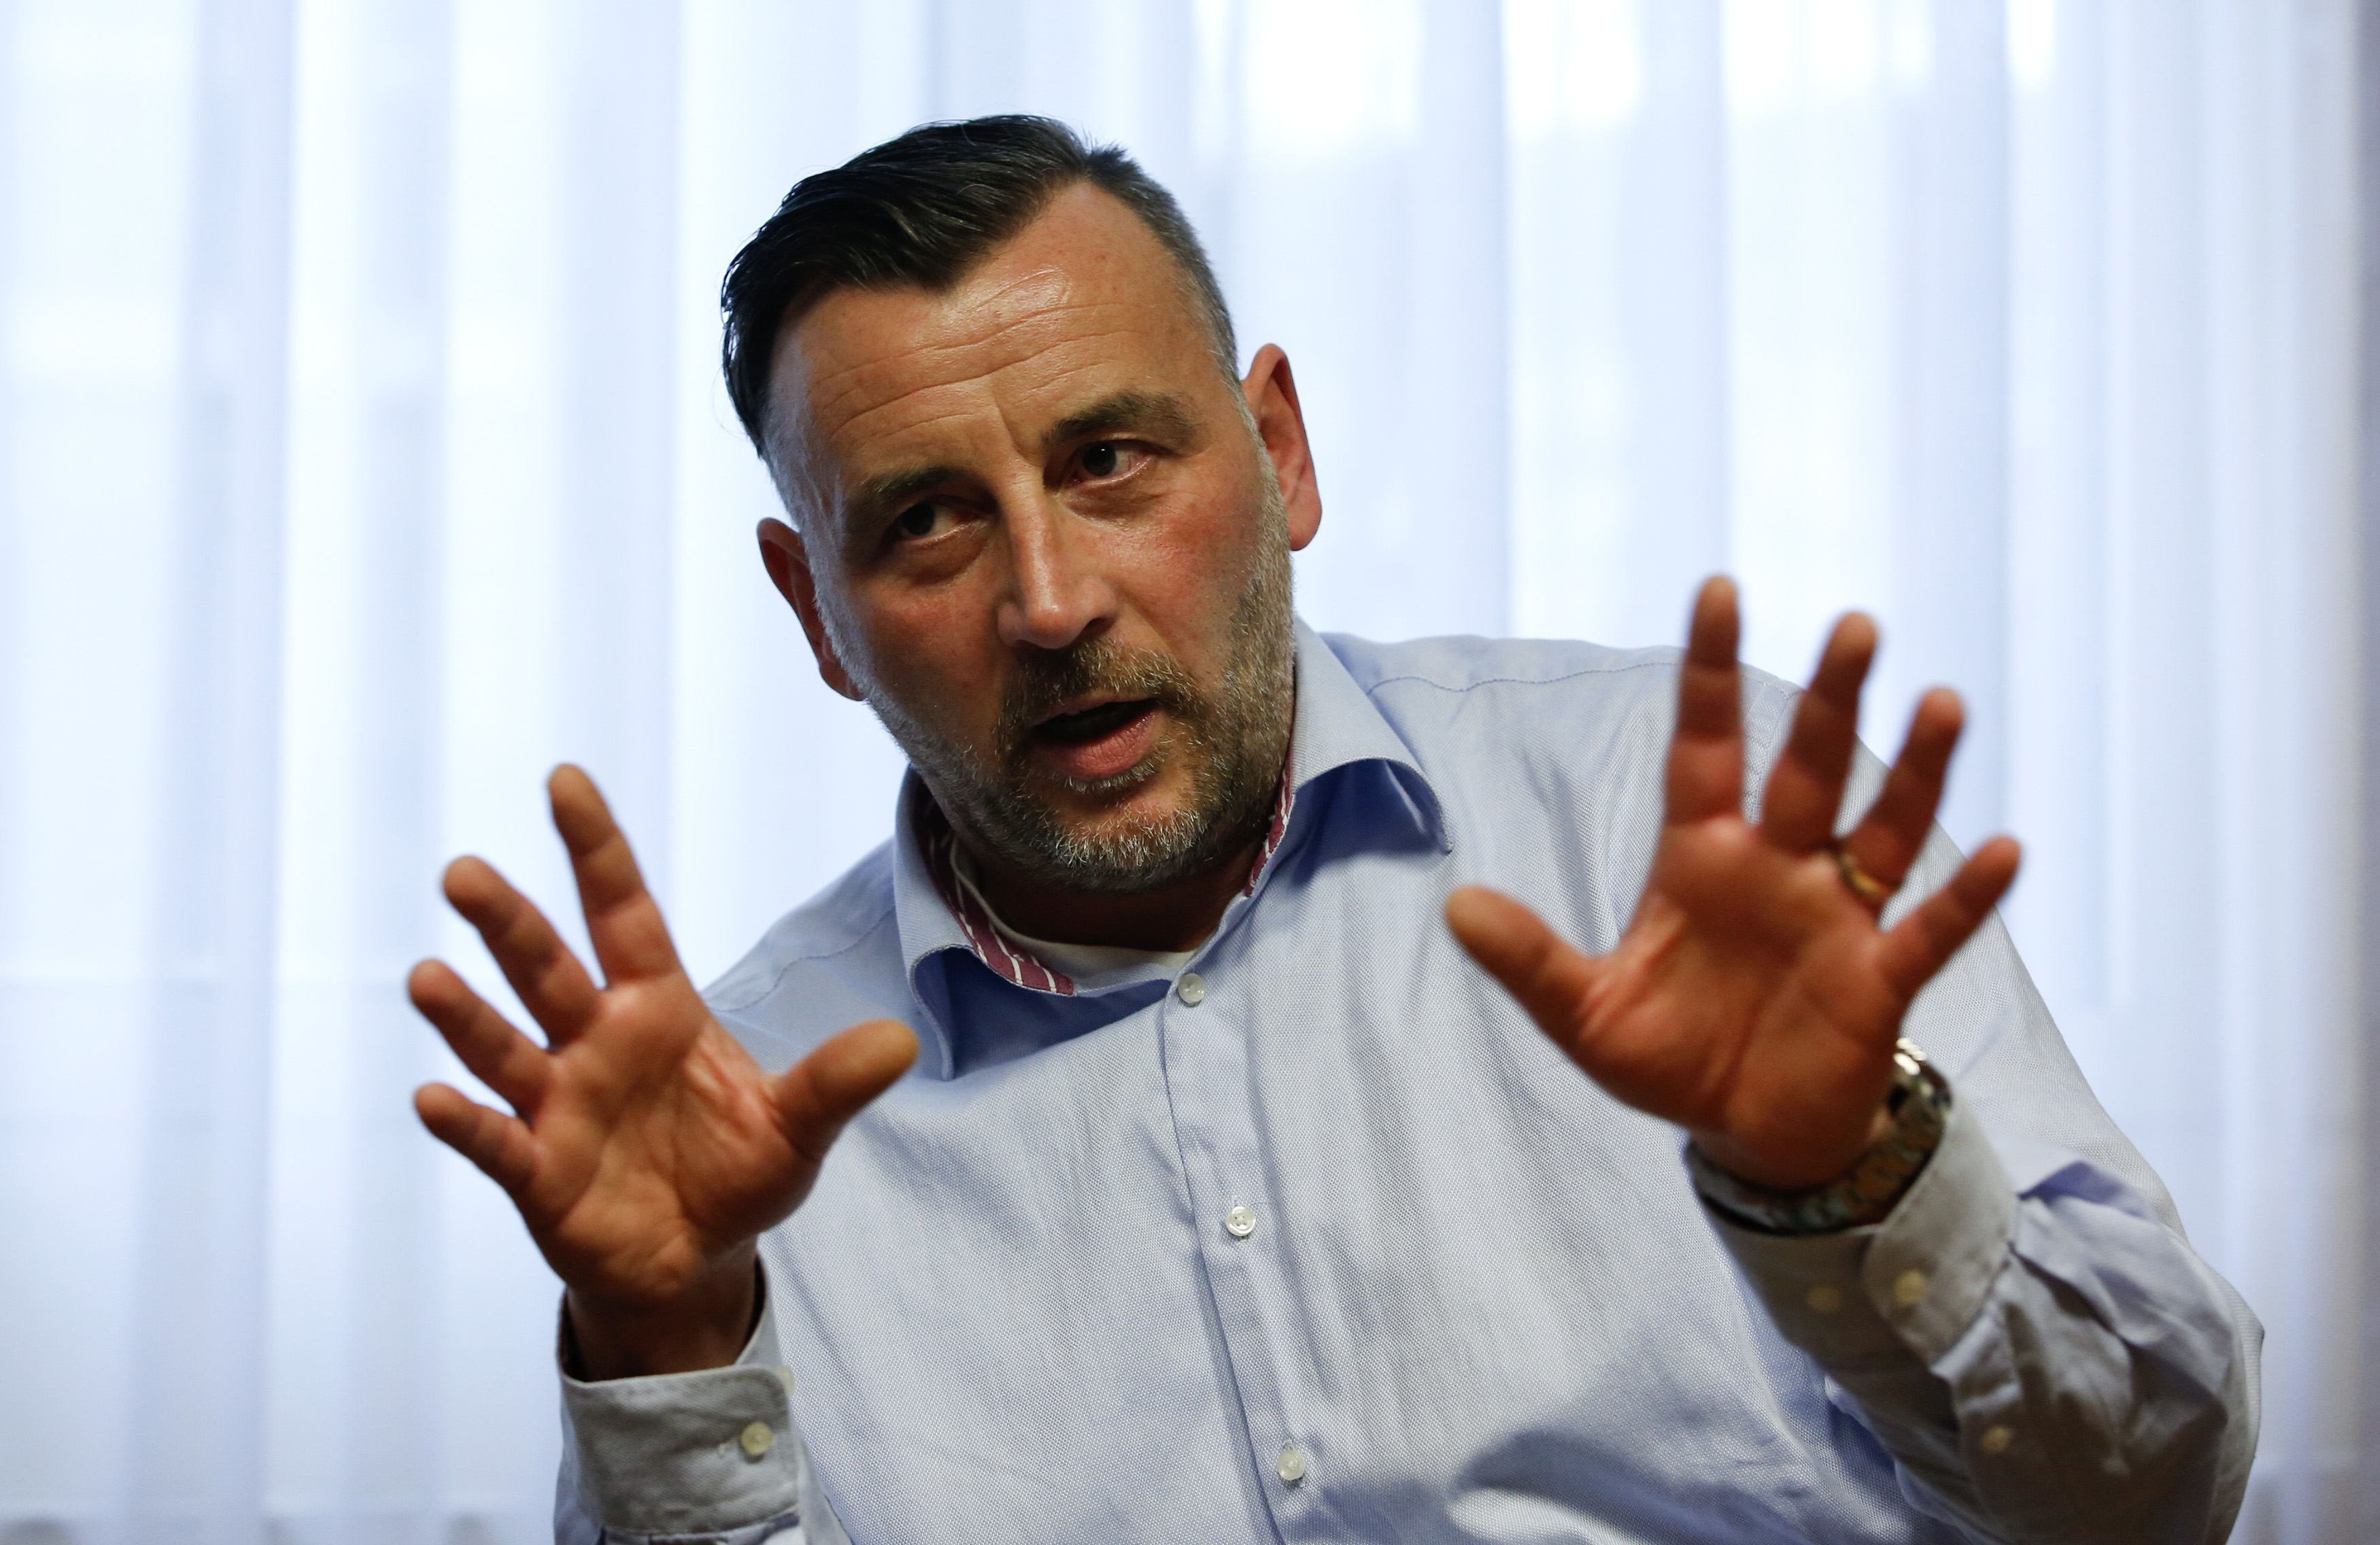 Lutz Bachmann, co-leader of anti-immigration group PEGIDA, a German abbreviation for "Patriotic Europeans against the Islamization of the West" during a Reuters interview in Dresden on Jan. 12, 2015. (Faabrizio Bensch—Reuters)